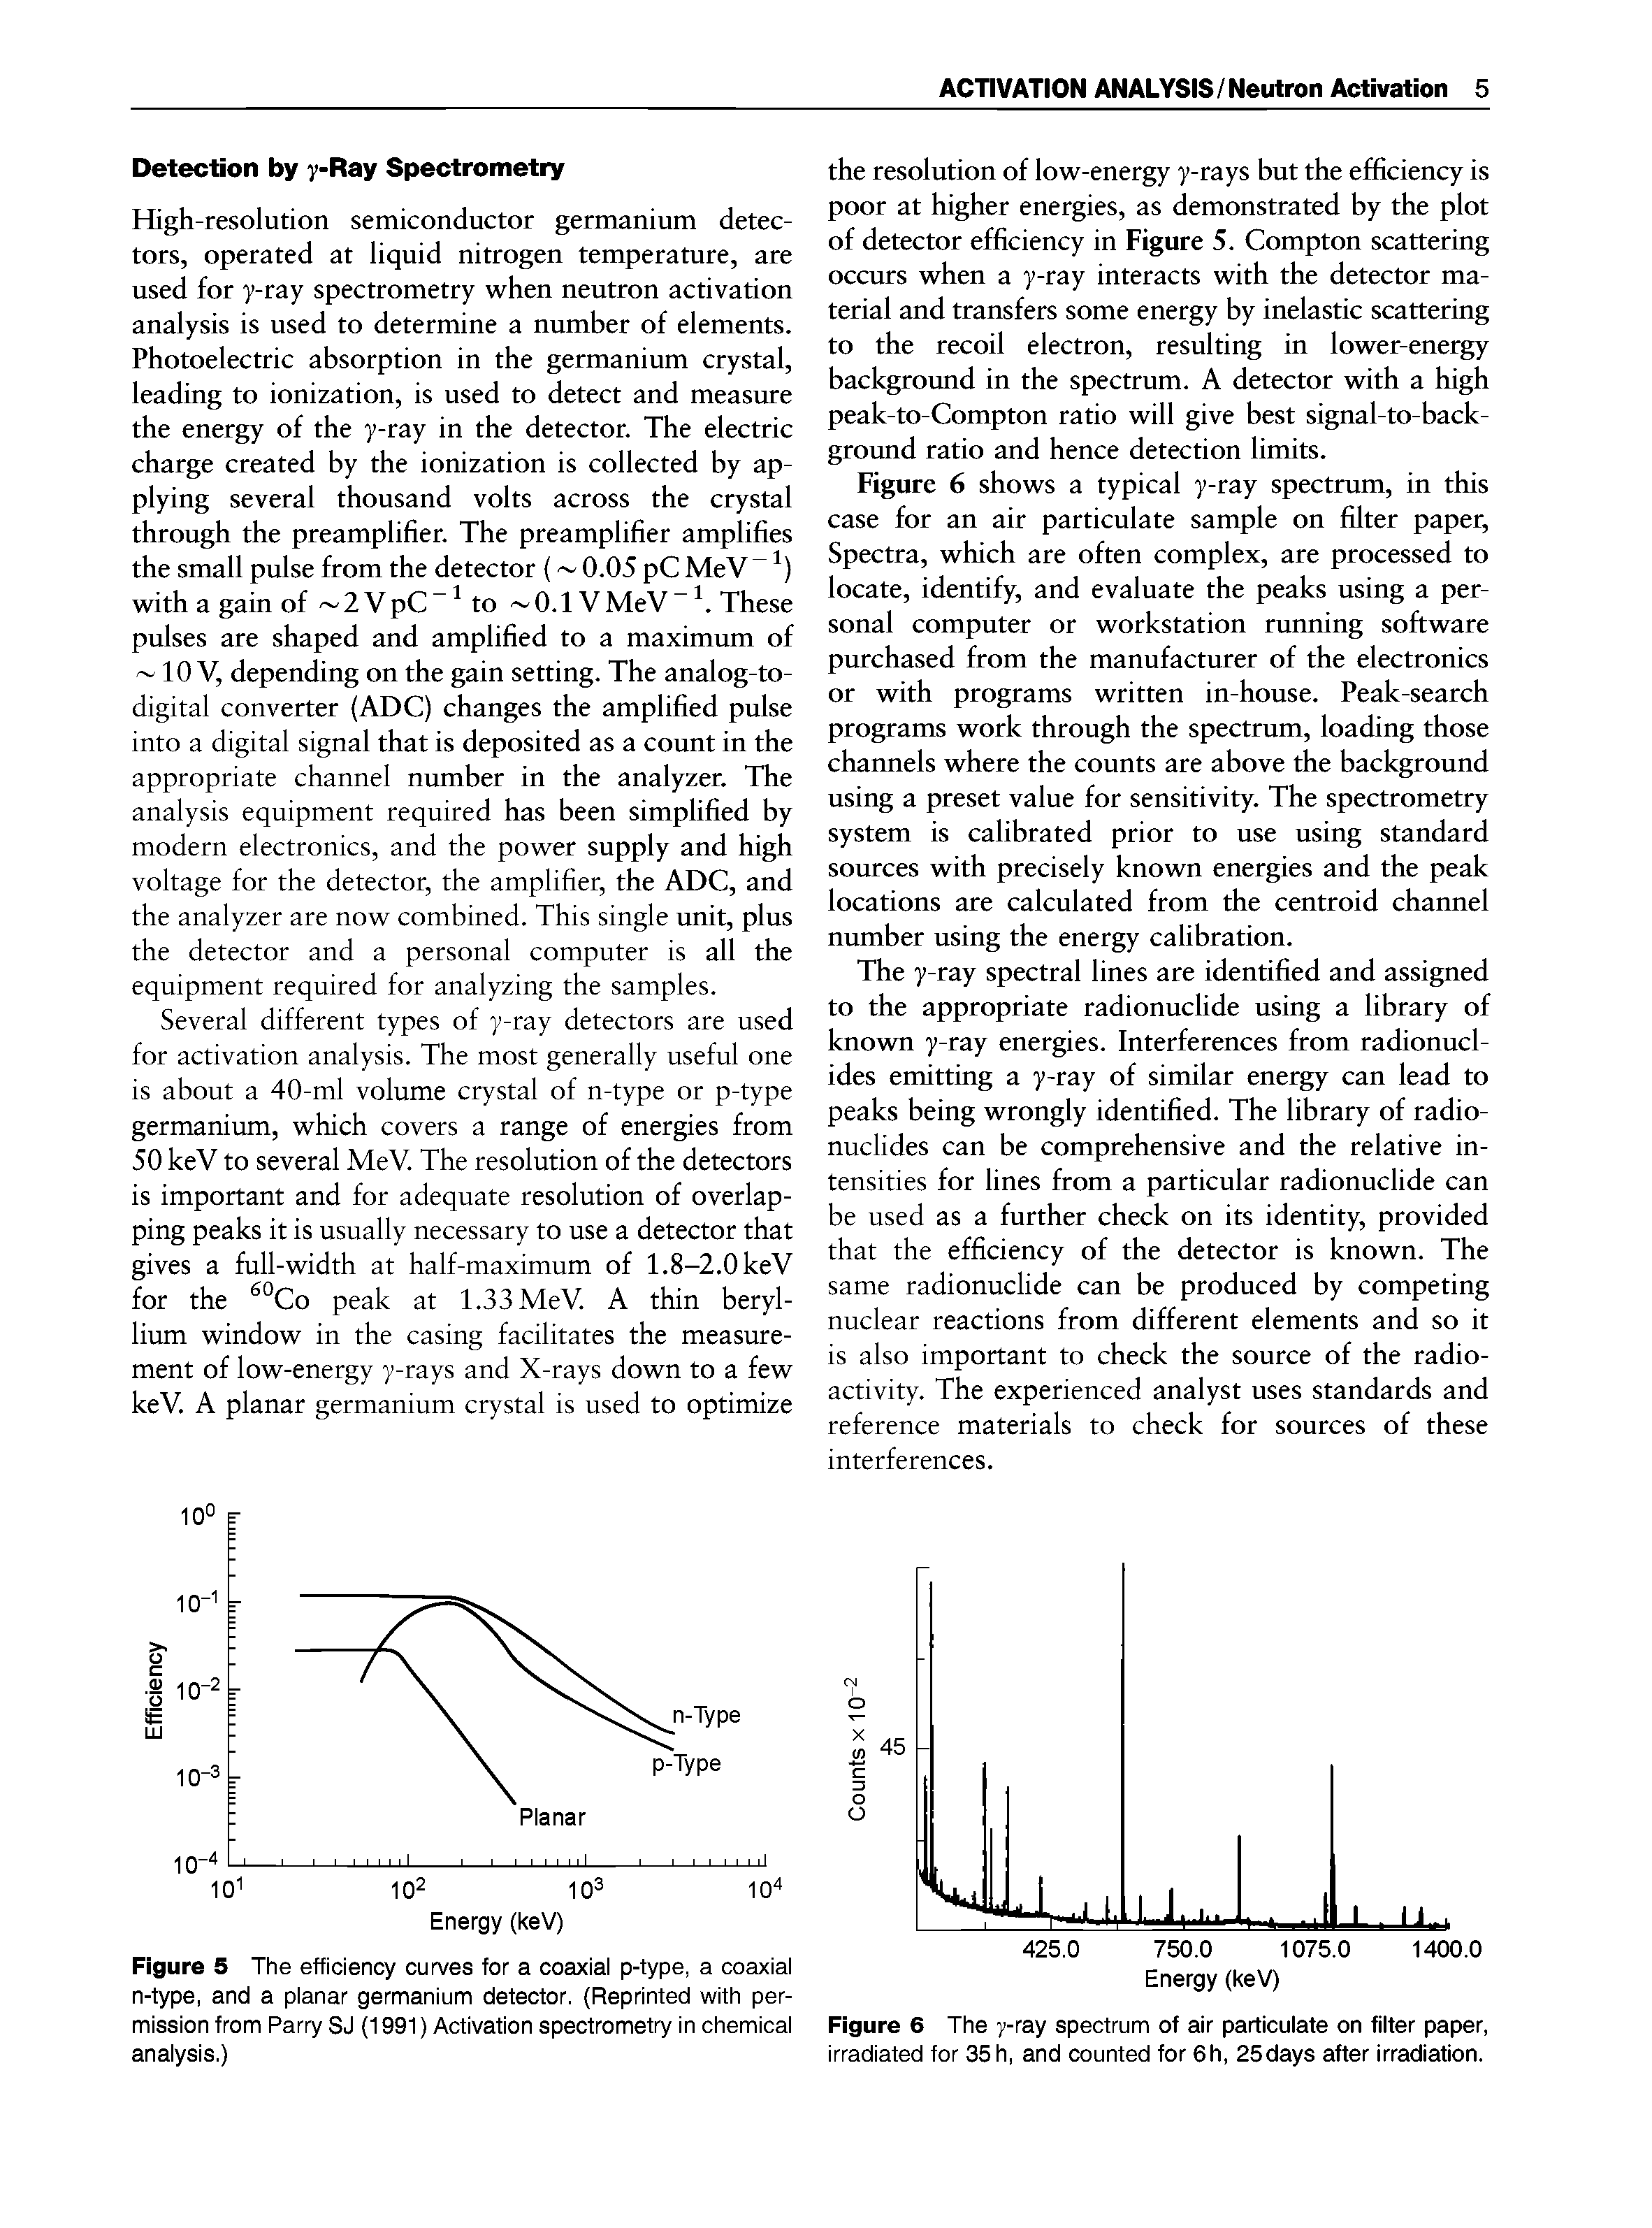 Figure 5 The efficiency curves for a coaxial p-type, a coaxial n-type, and a planar germanium detector. (Reprinted with permission from Parry SJ (1991) Activation spectrometry in chemical analysis.)...